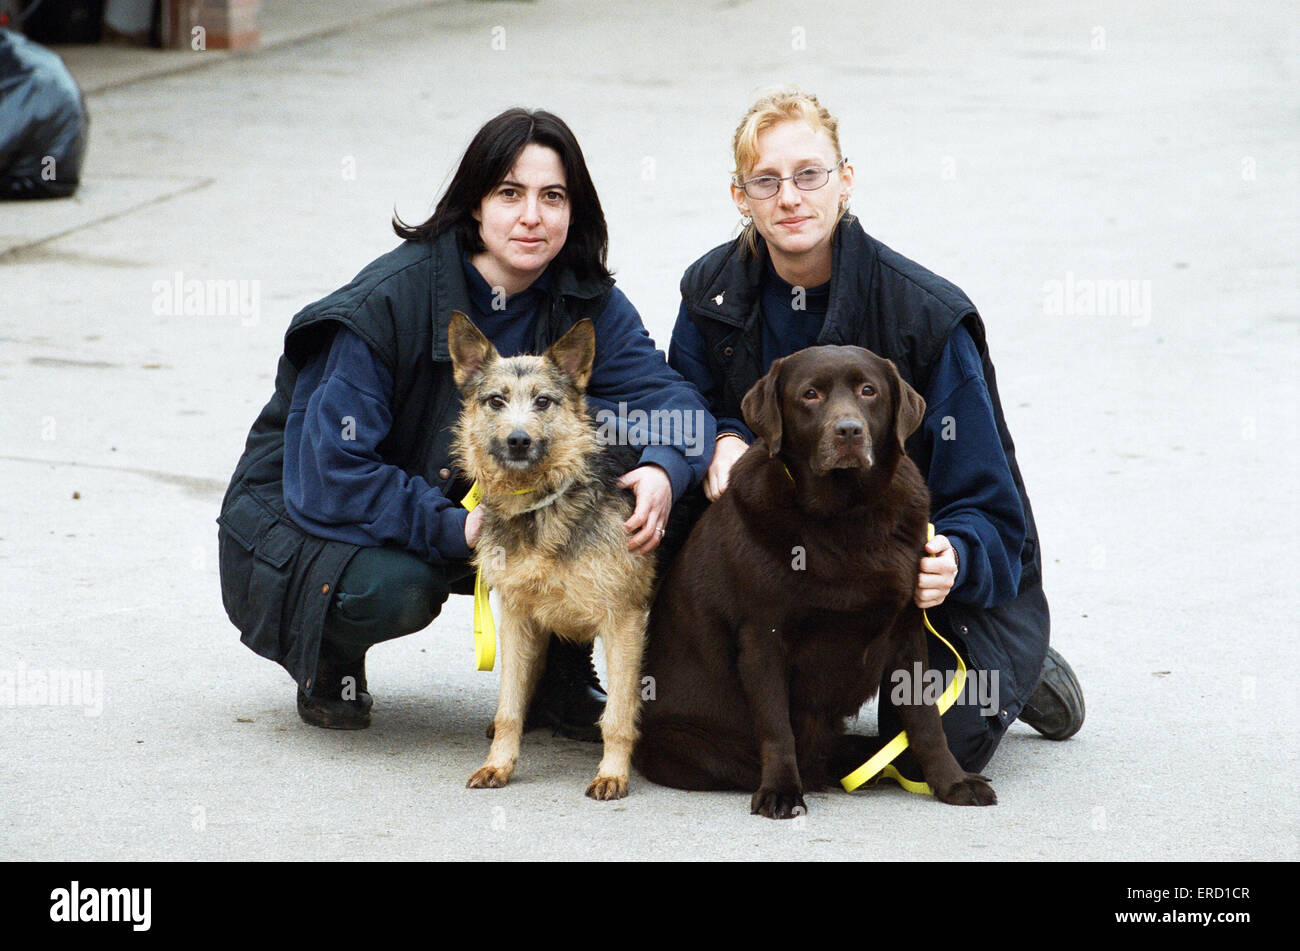 Sue Stonebridge (left) with Scratch an Alsatian crossbreed and Jane Rose (right) with Brownie a Labrador. Both dogs from the Honiley Rescue Centre. 13th January 2001 Stock Photo